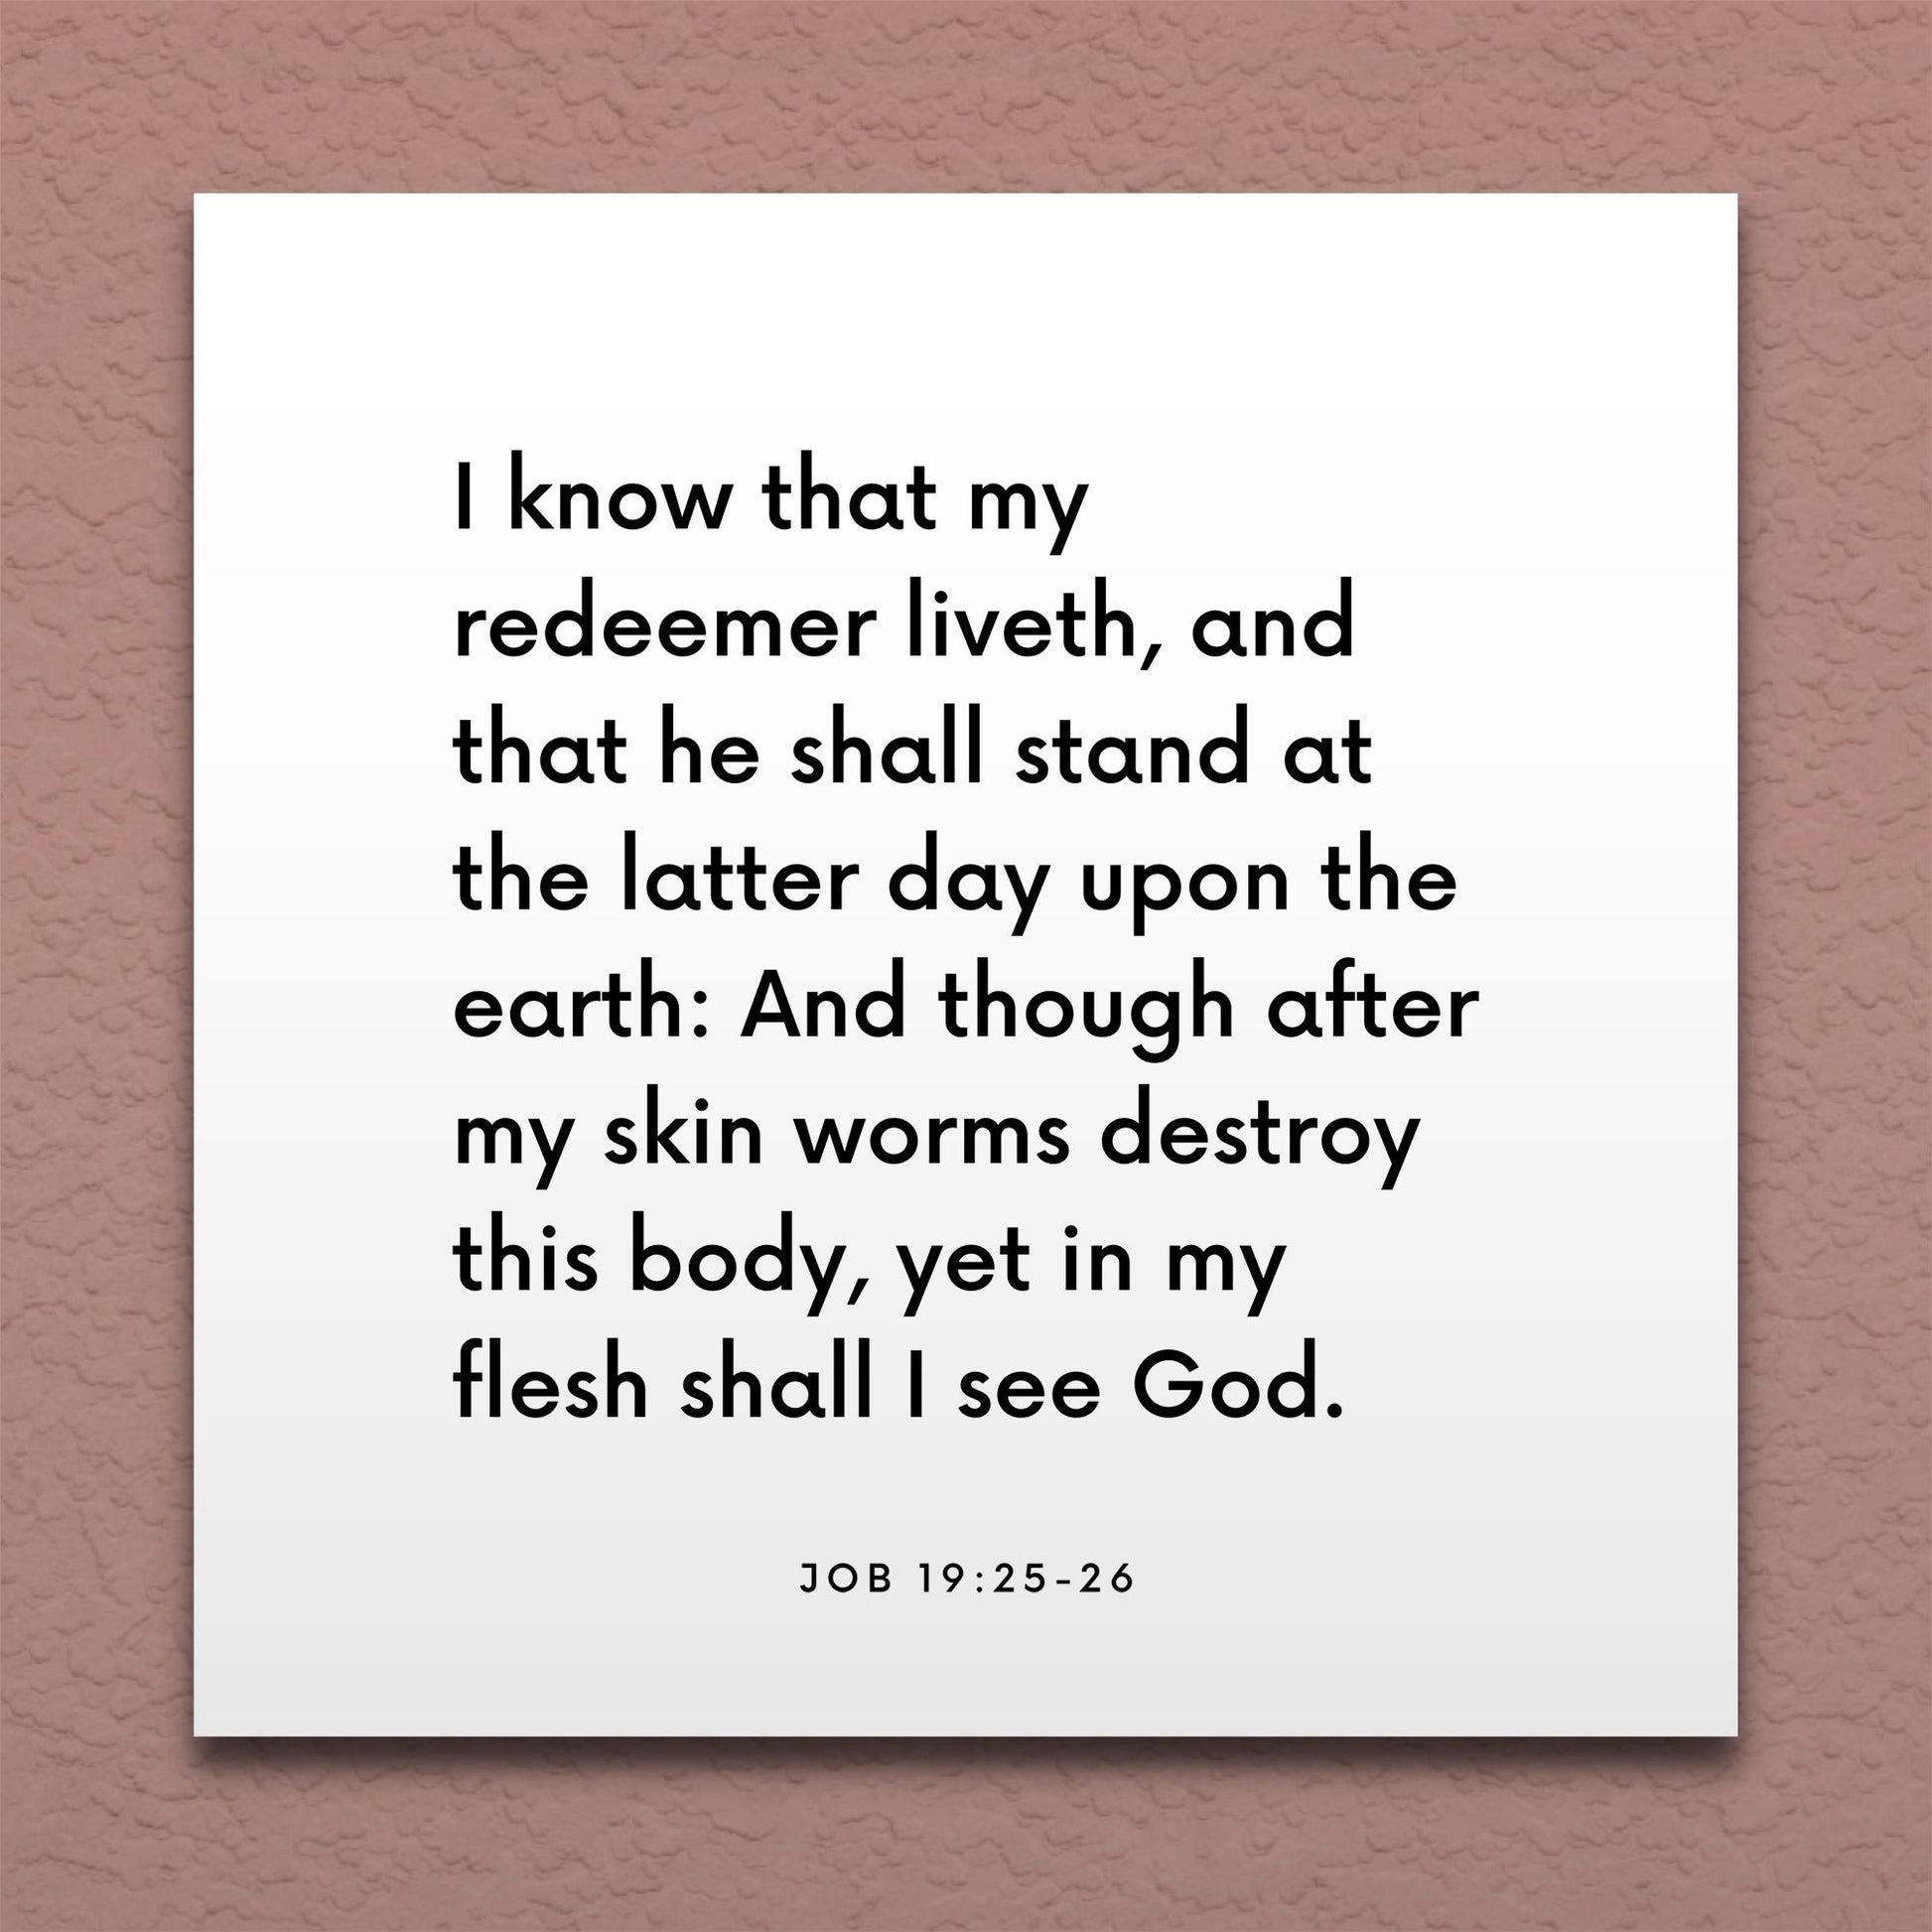 Wall-mounted scripture tile for Job 19:25-26 - "I know that my redeemer liveth, and that he shall stand"